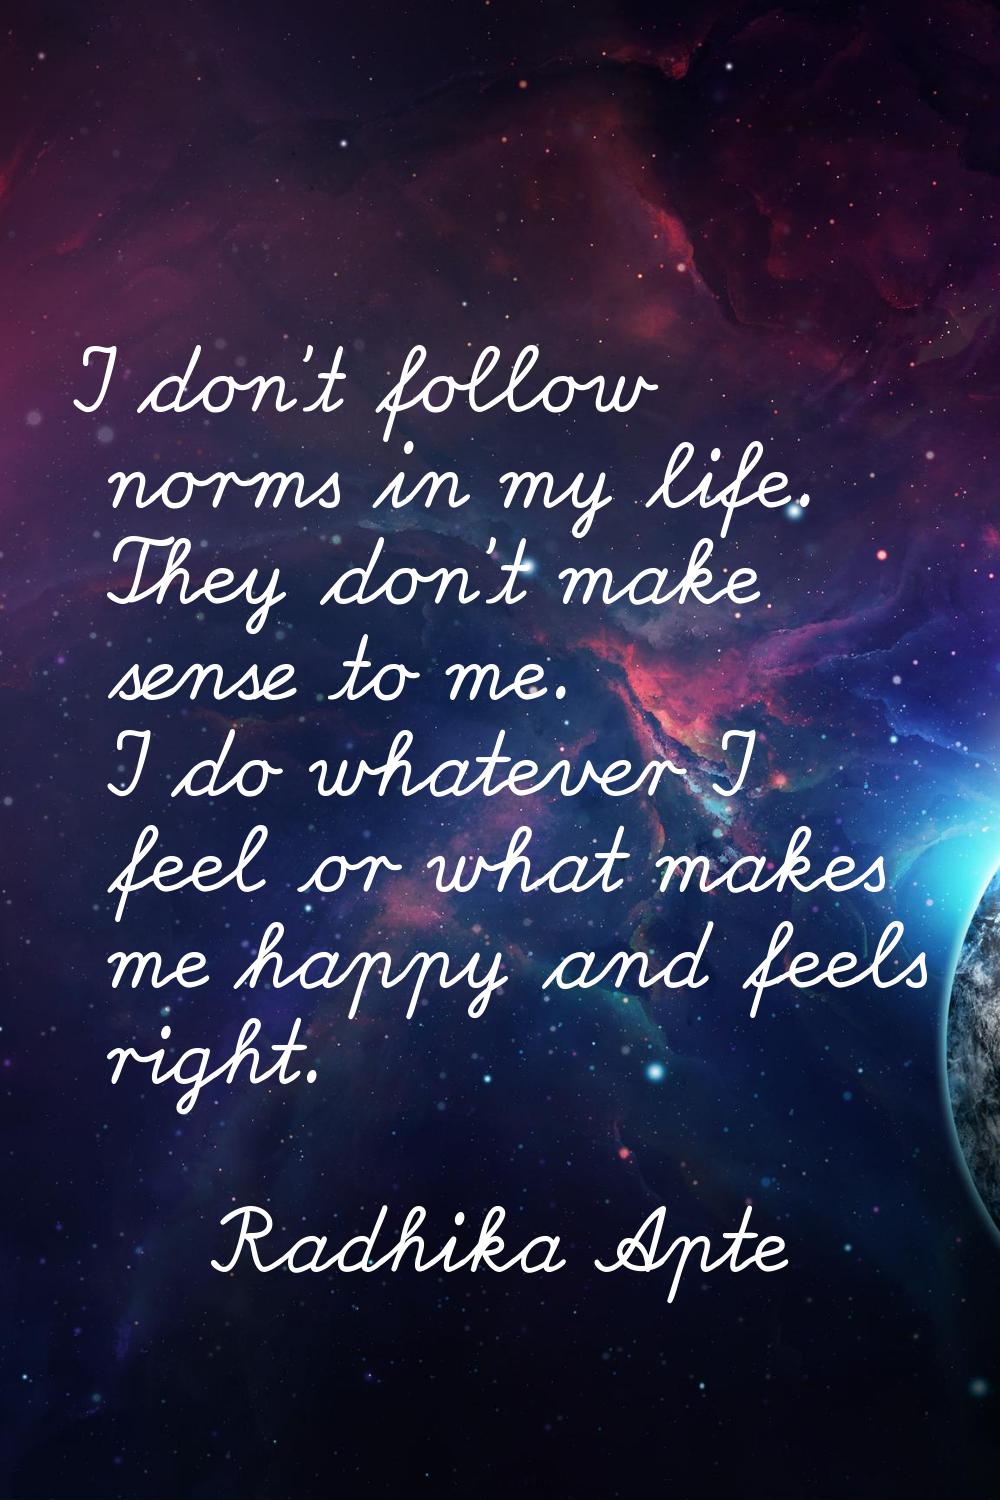 I don't follow norms in my life. They don't make sense to me. I do whatever I feel or what makes me